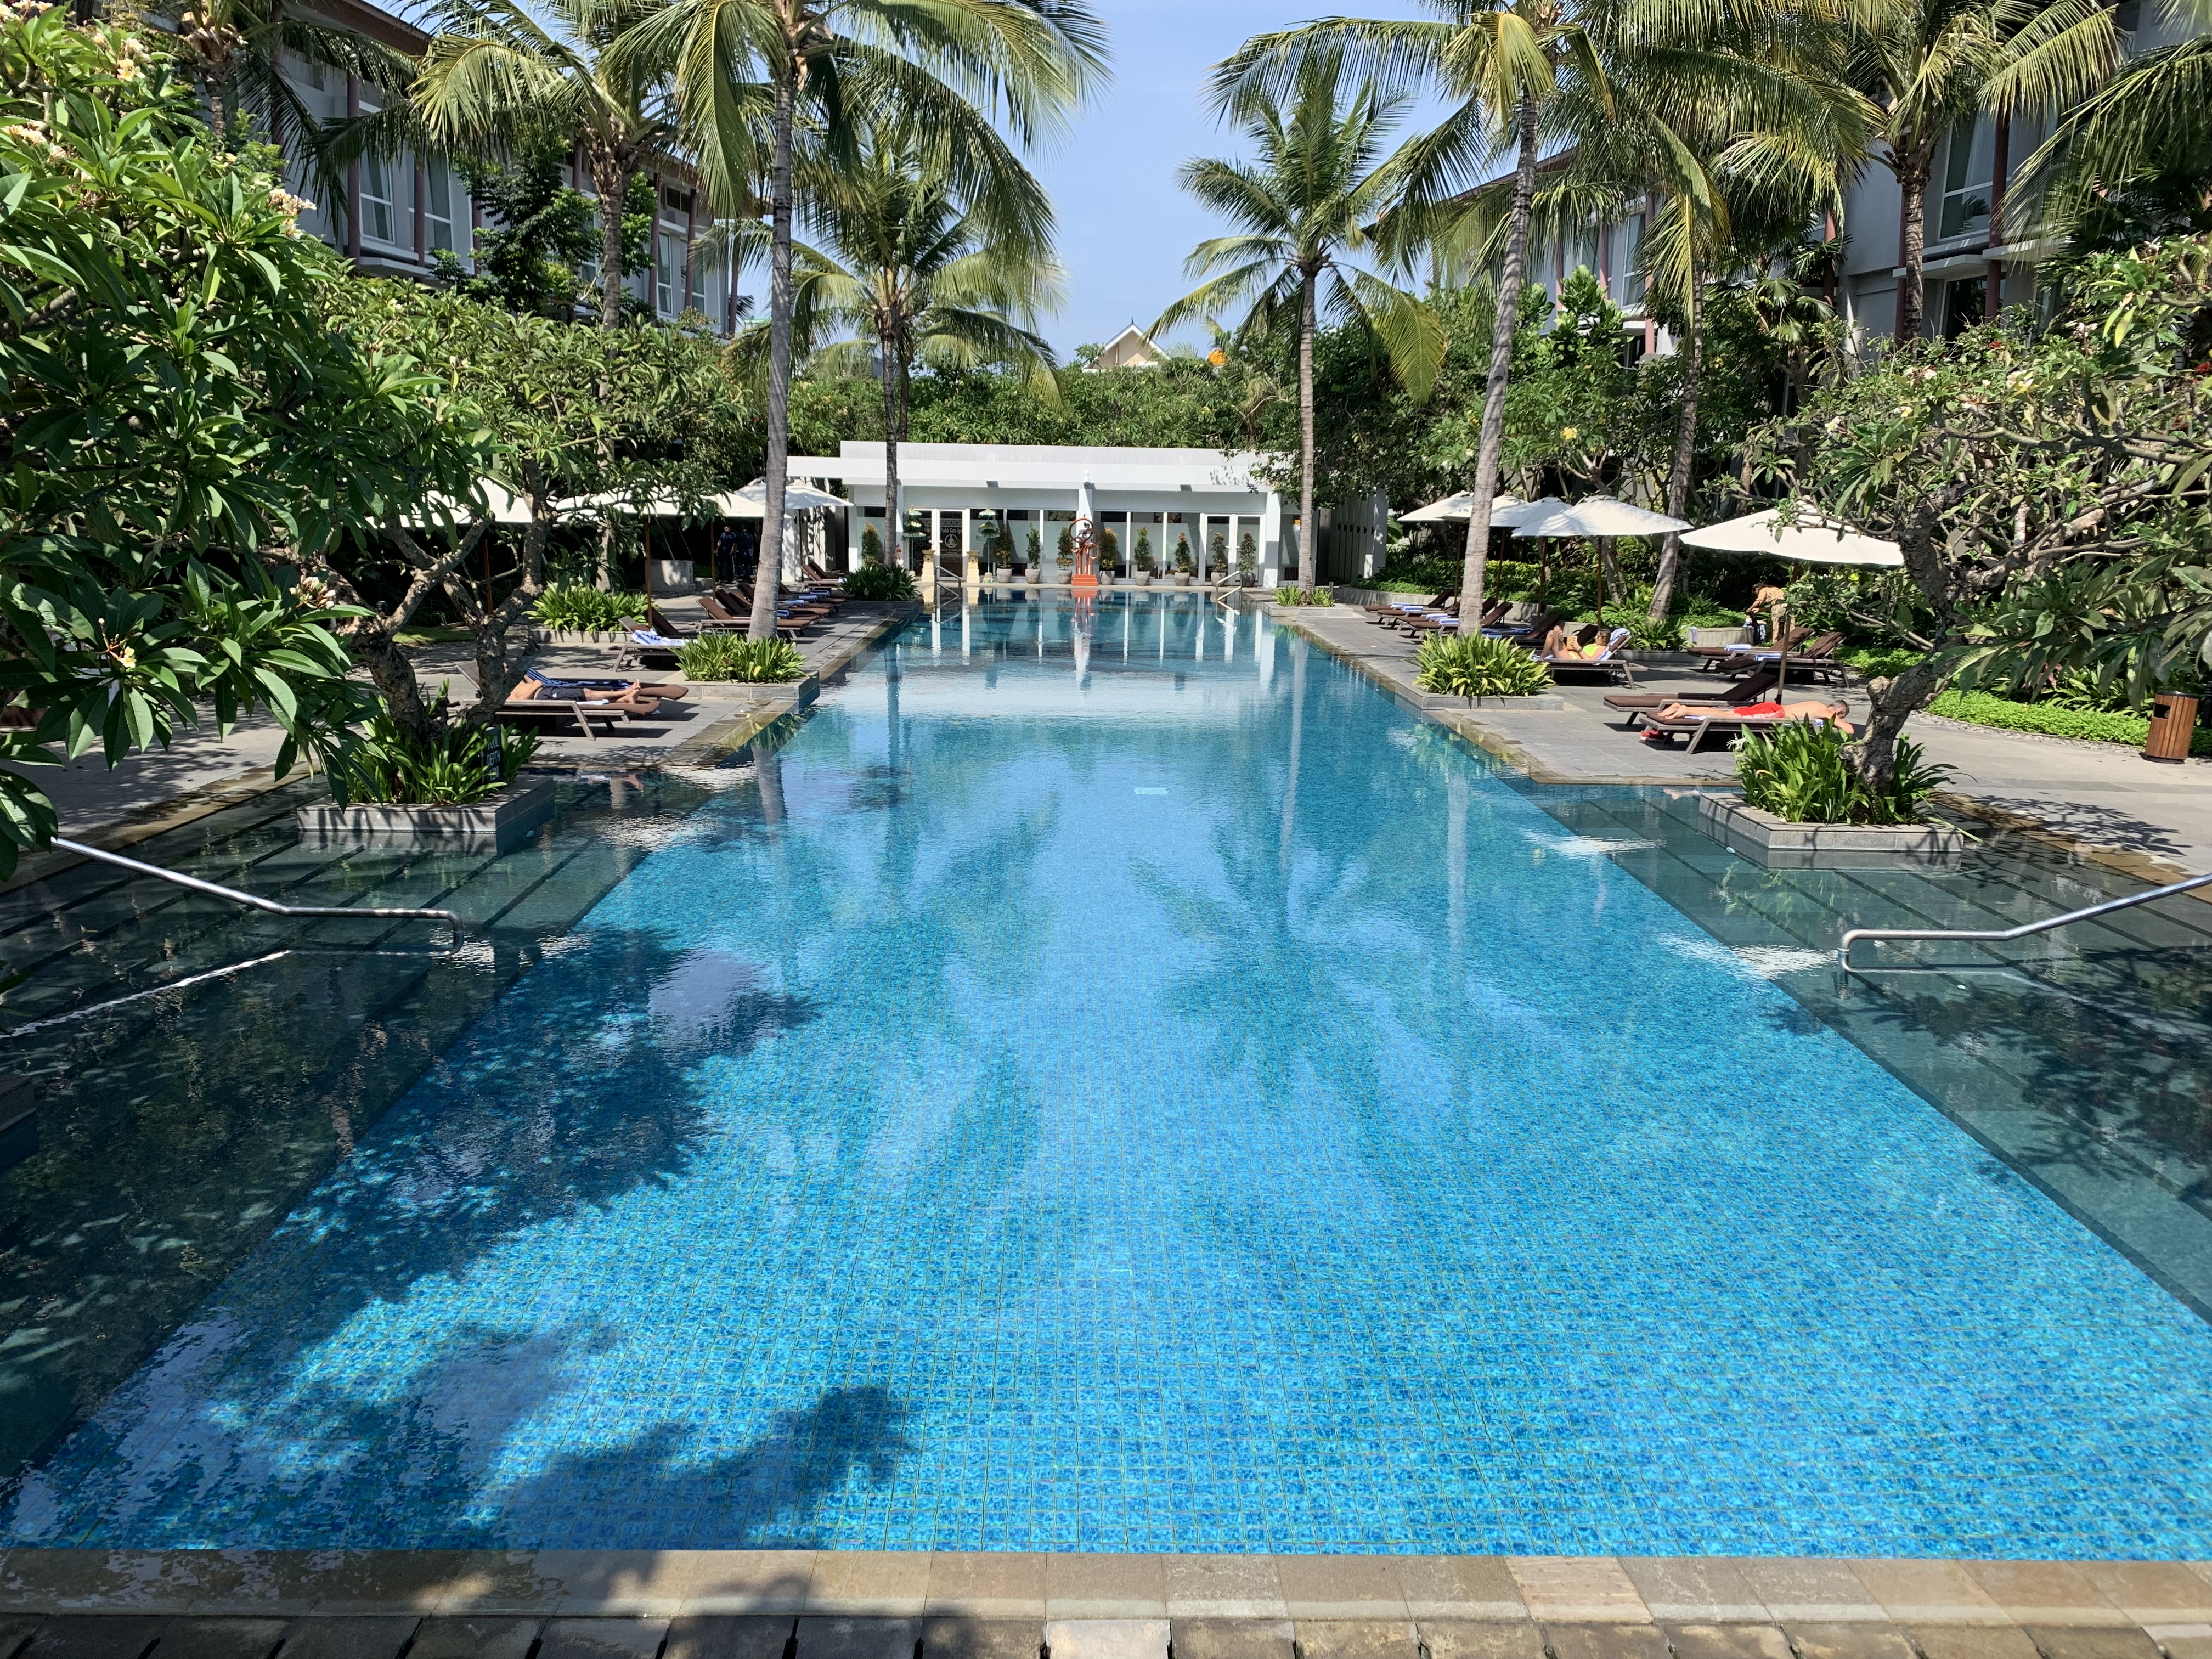 Hilton Garden Inn Bali Ngurah Rai Airport Is This The Best Hotel Value Anywhere Can Be Had For 20 Per Night Travel Realized